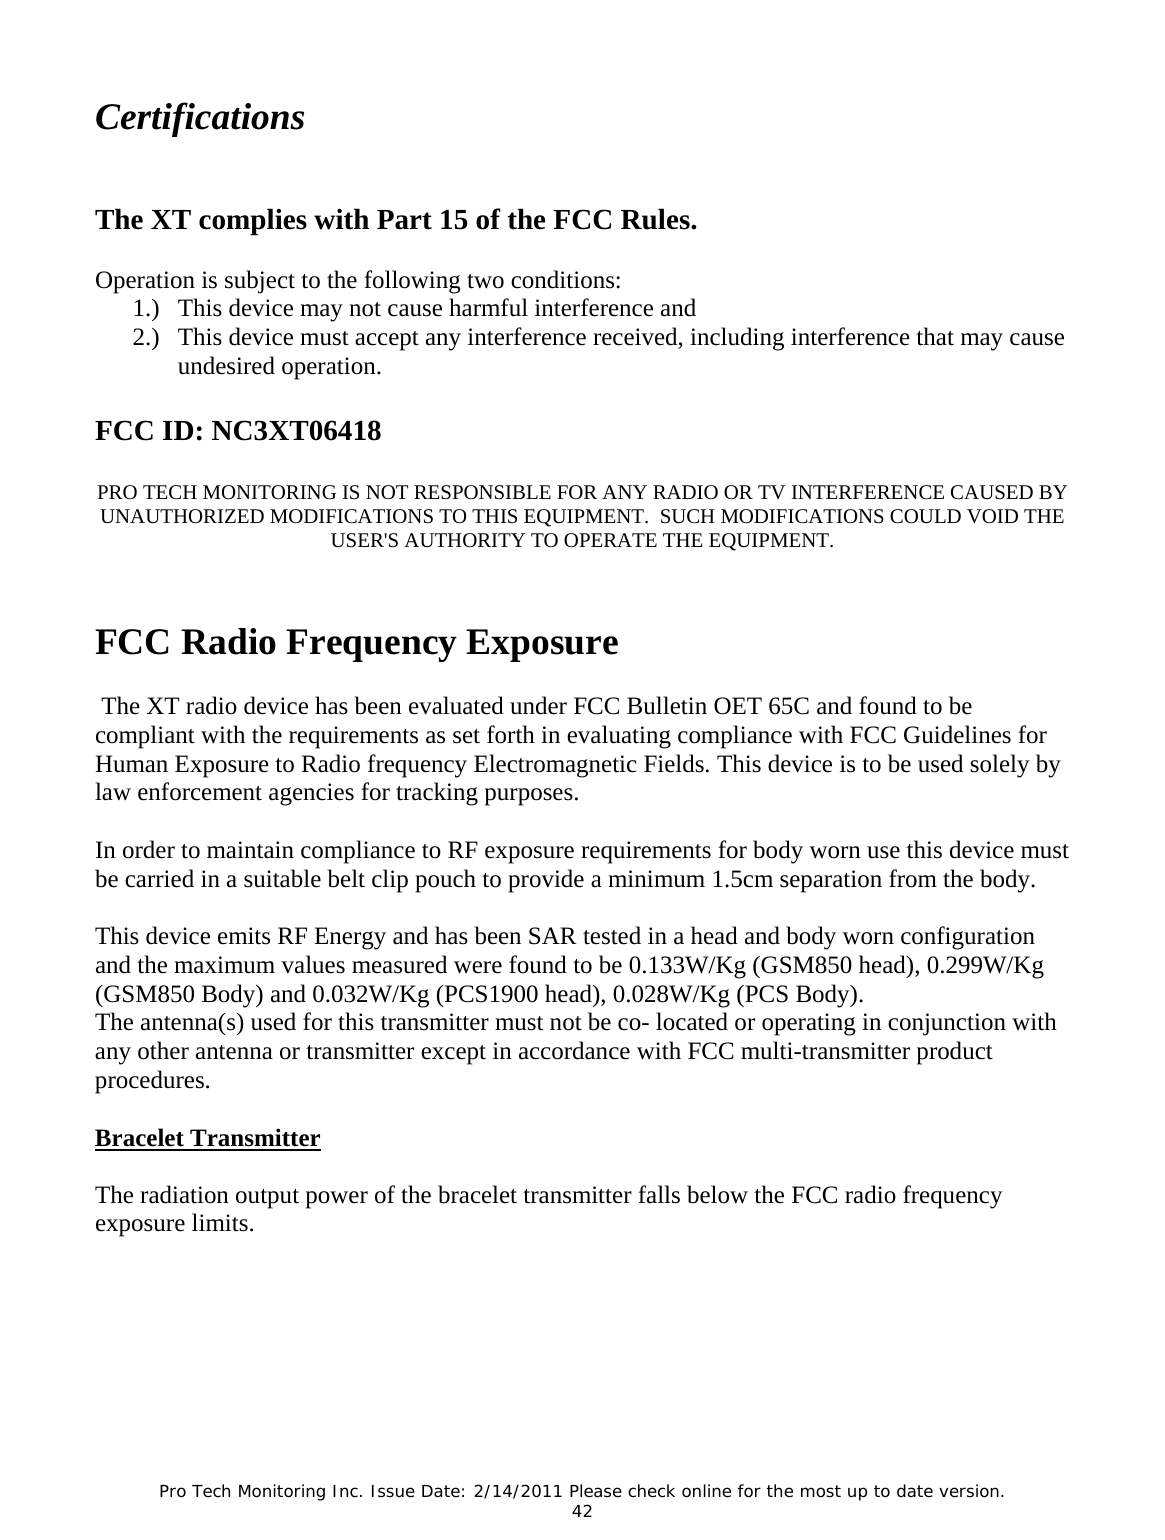 Pro Tech Monitoring Inc. Issue Date: 2/14/2011 Please check online for the most up to date version. 42  Certifications   The XT complies with Part 15 of the FCC Rules.    Operation is subject to the following two conditions:   1.) This device may not cause harmful interference and  2.) This device must accept any interference received, including interference that may cause undesired operation.  FCC ID: NC3XT06418  PRO TECH MONITORING IS NOT RESPONSIBLE FOR ANY RADIO OR TV INTERFERENCE CAUSED BY UNAUTHORIZED MODIFICATIONS TO THIS EQUIPMENT.  SUCH MODIFICATIONS COULD VOID THE USER&apos;S AUTHORITY TO OPERATE THE EQUIPMENT.   FCC Radio Frequency Exposure   The XT radio device has been evaluated under FCC Bulletin OET 65C and found to be compliant with the requirements as set forth in evaluating compliance with FCC Guidelines for Human Exposure to Radio frequency Electromagnetic Fields. This device is to be used solely by law enforcement agencies for tracking purposes.    In order to maintain compliance to RF exposure requirements for body worn use this device must be carried in a suitable belt clip pouch to provide a minimum 1.5cm separation from the body.    This device emits RF Energy and has been SAR tested in a head and body worn configuration and the maximum values measured were found to be 0.133W/Kg (GSM850 head), 0.299W/Kg (GSM850 Body) and 0.032W/Kg (PCS1900 head), 0.028W/Kg (PCS Body). The antenna(s) used for this transmitter must not be co- located or operating in conjunction with any other antenna or transmitter except in accordance with FCC multi-transmitter product procedures.   Bracelet Transmitter  The radiation output power of the bracelet transmitter falls below the FCC radio frequency exposure limits.    